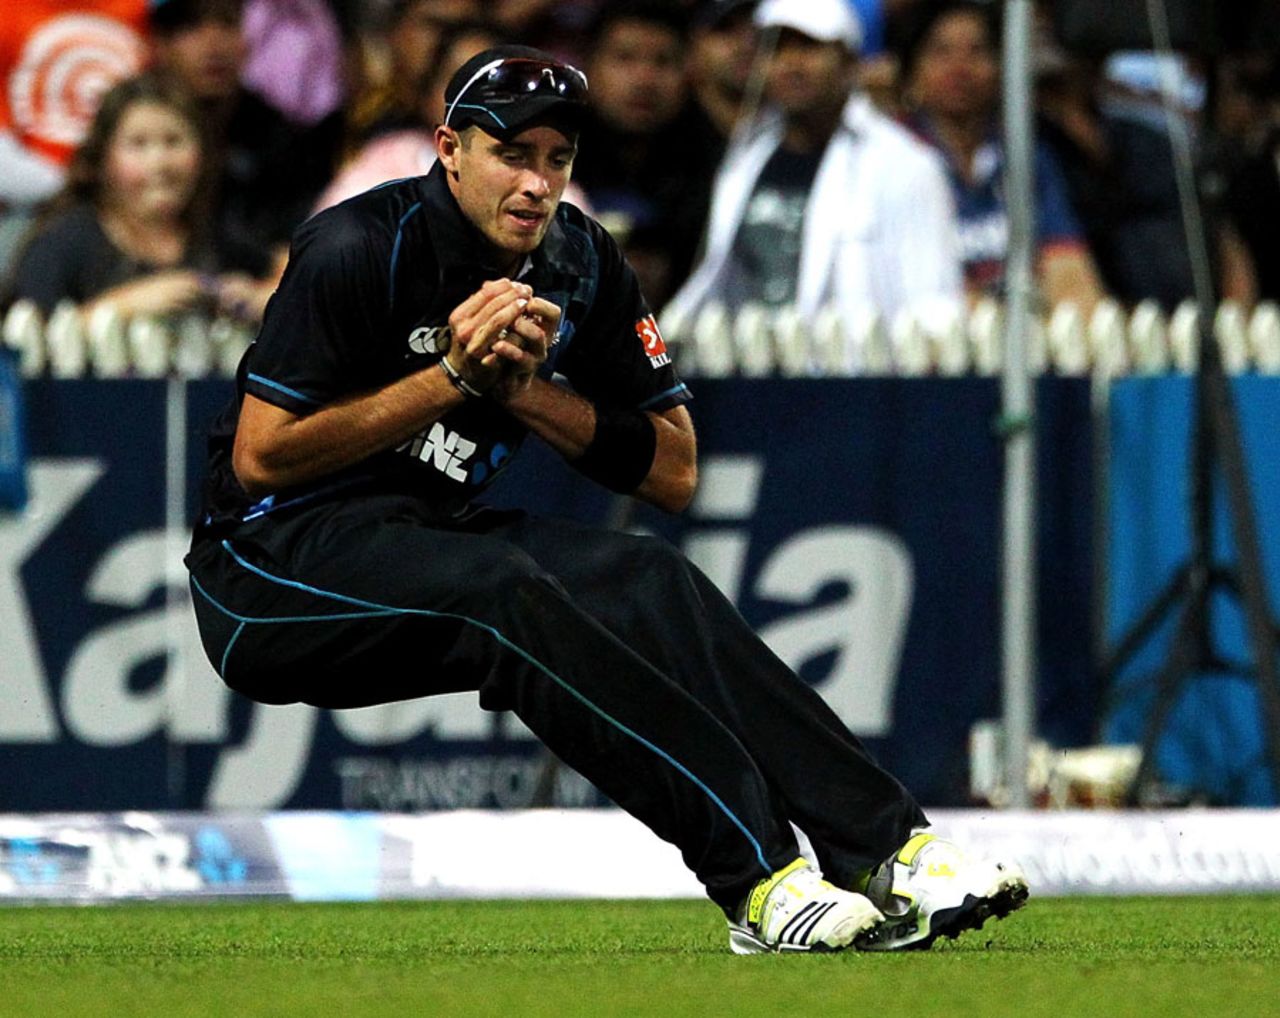 Tim Southee gets under a catch to dismiss Suresh Raina for 35, New Zealand v India, 2nd ODI, Hamilton, January 22, 2014